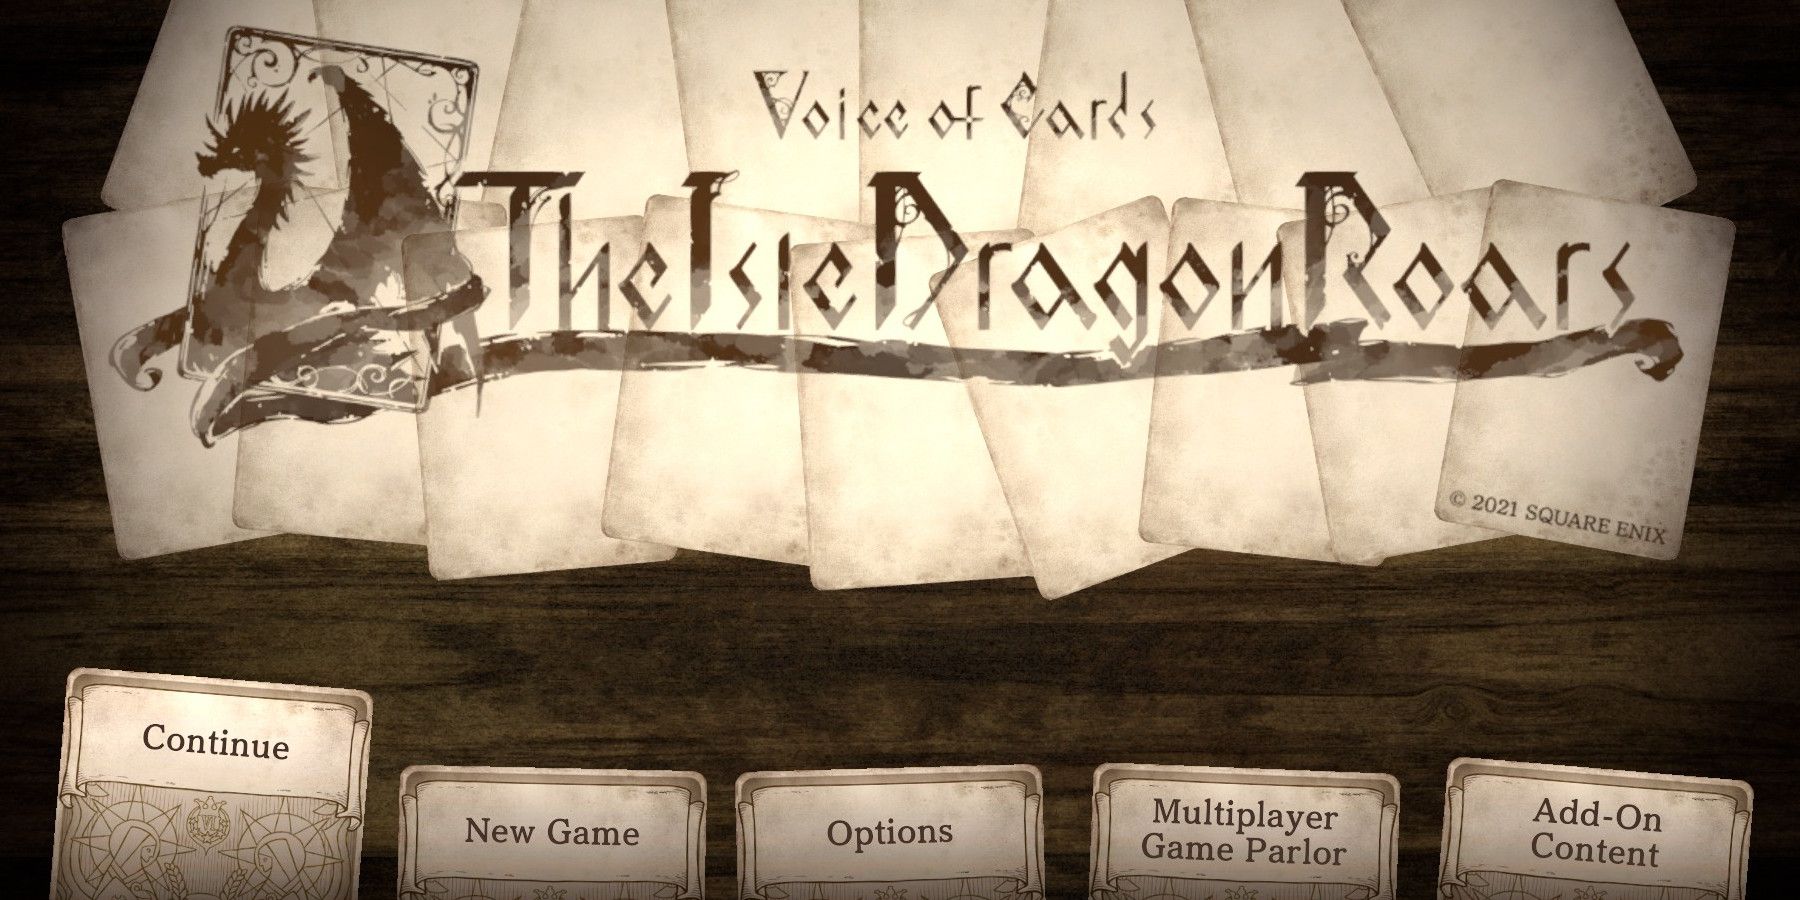 Voice-Of-Cards-The-Isle-Dragon-Roars-Multiplayer-1